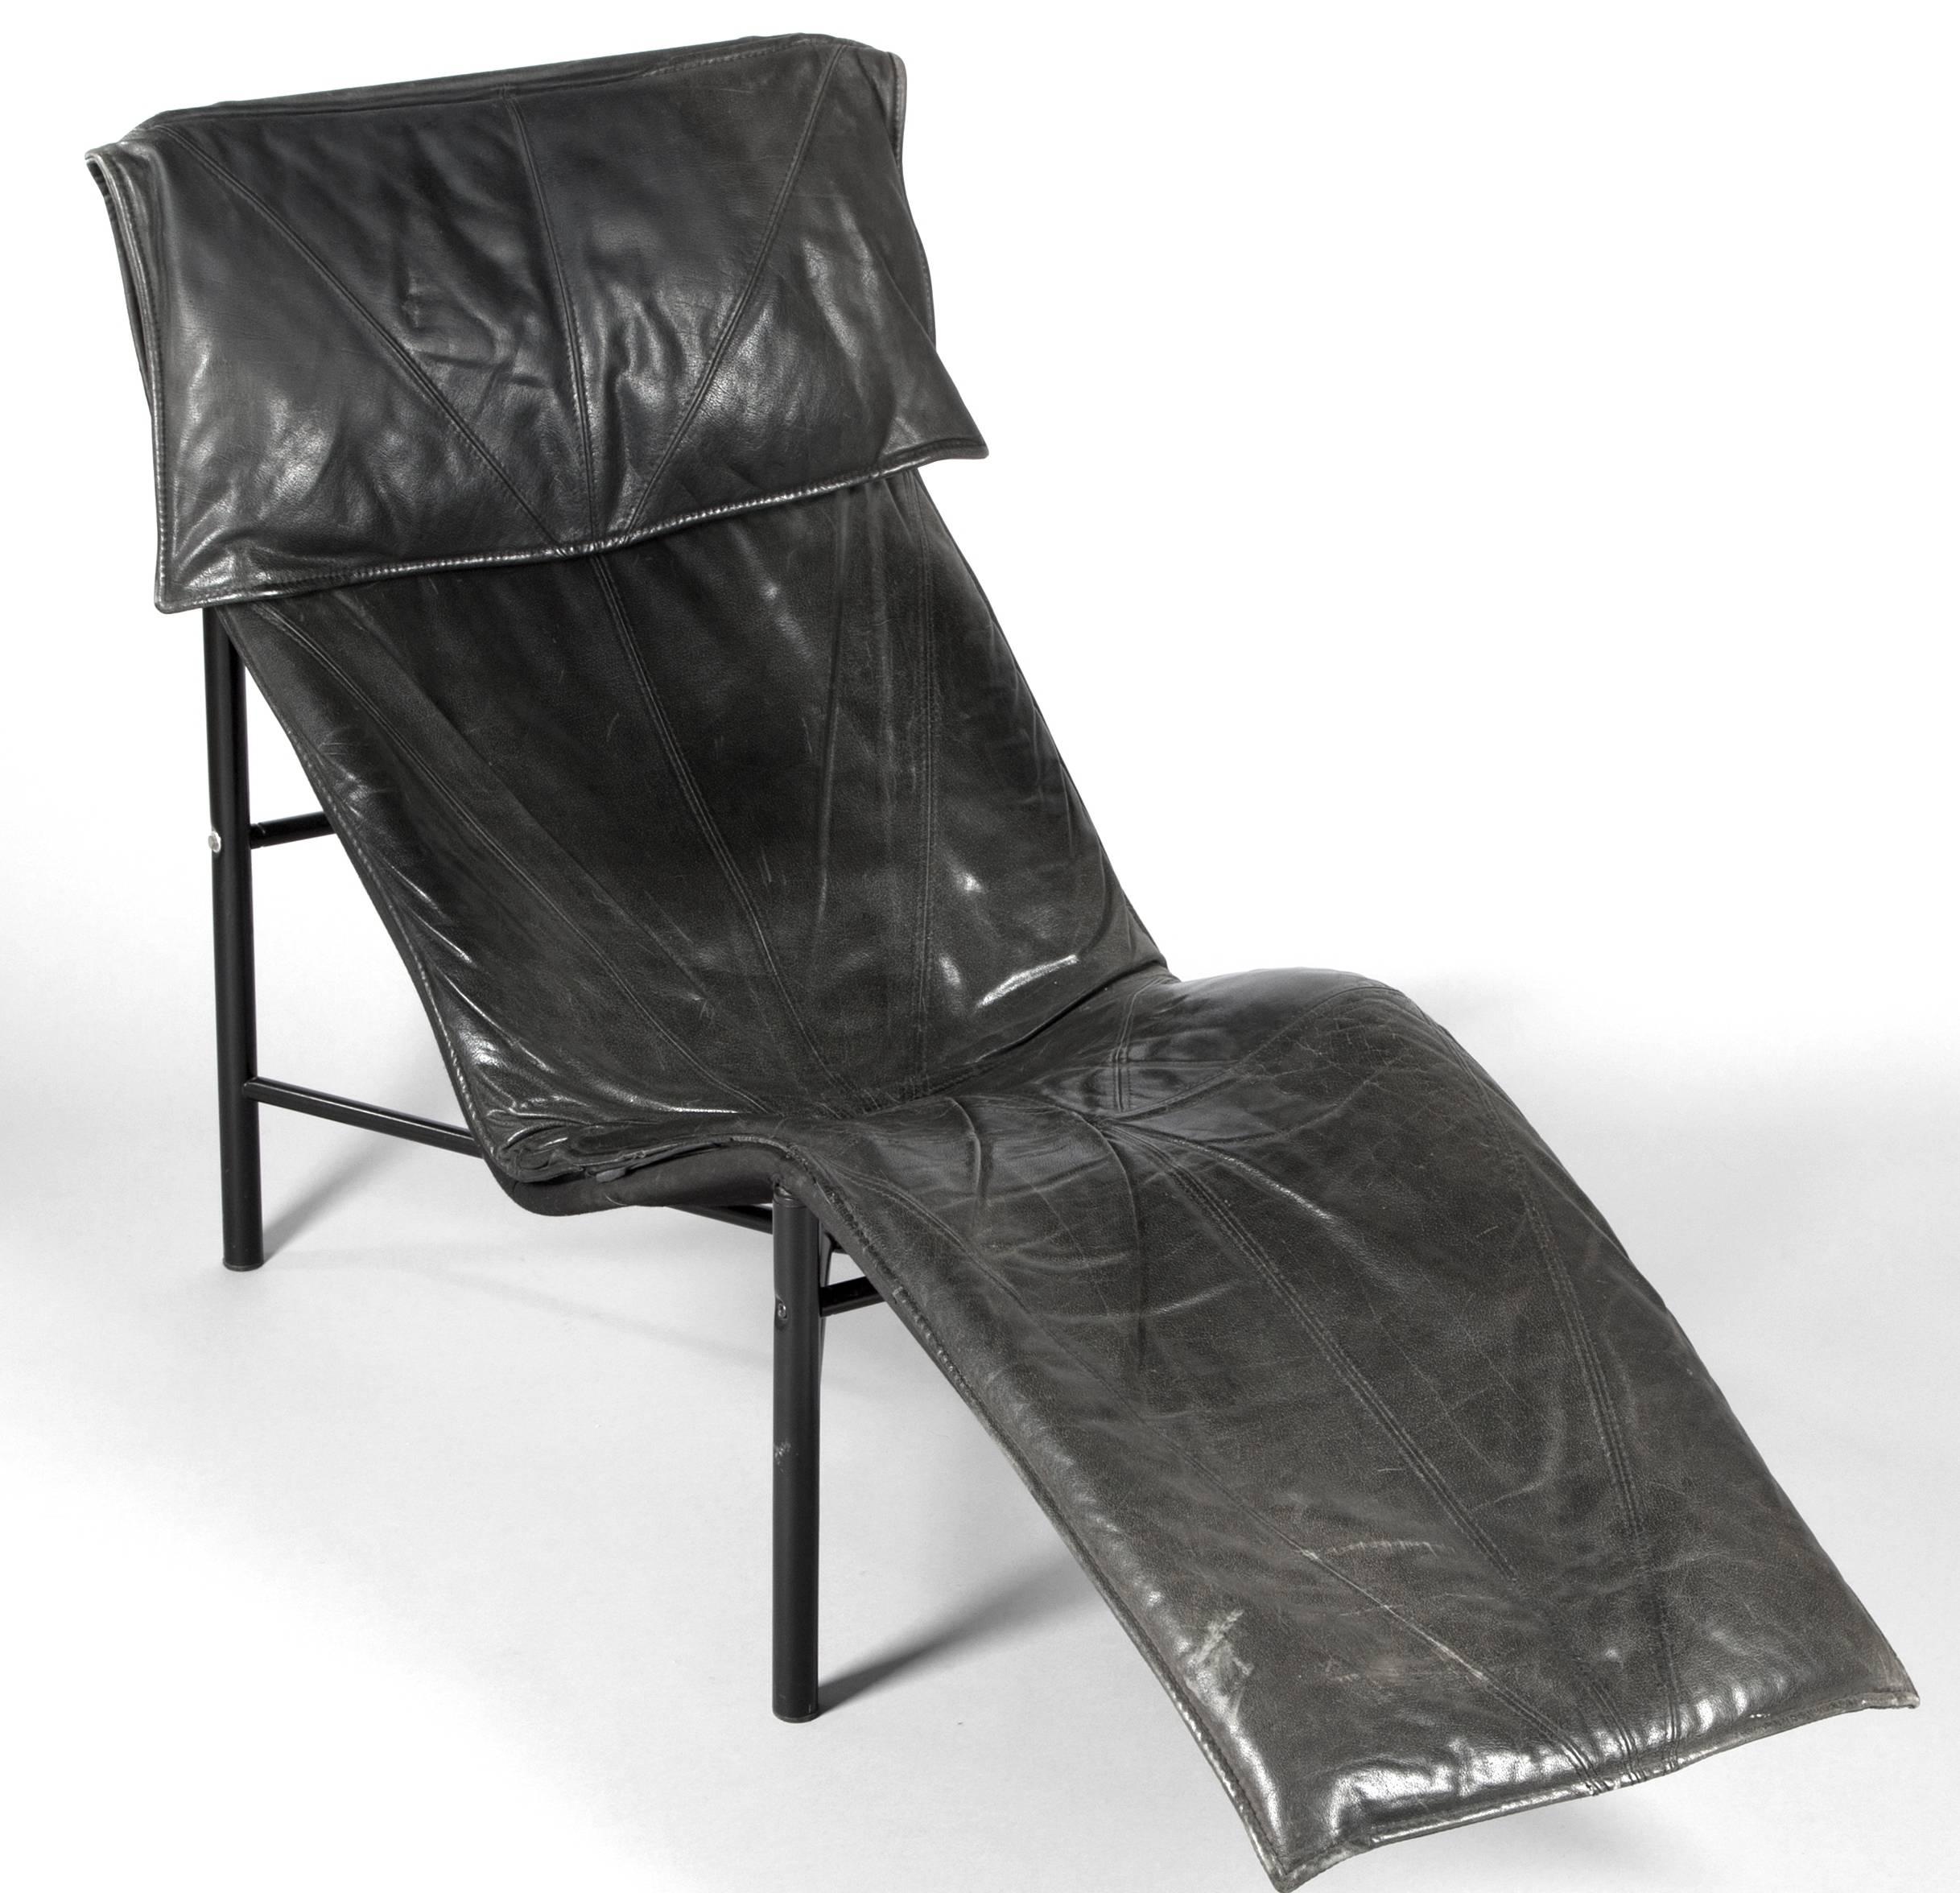 Leather chaise longue by Lord Bjorklund, the design features an architectural black steel tube frame with a curvy streamlined platform and leather,
circa 1970, made in Sweden
This is a very comfortable black leather lounge chair by Tord Bjorklund